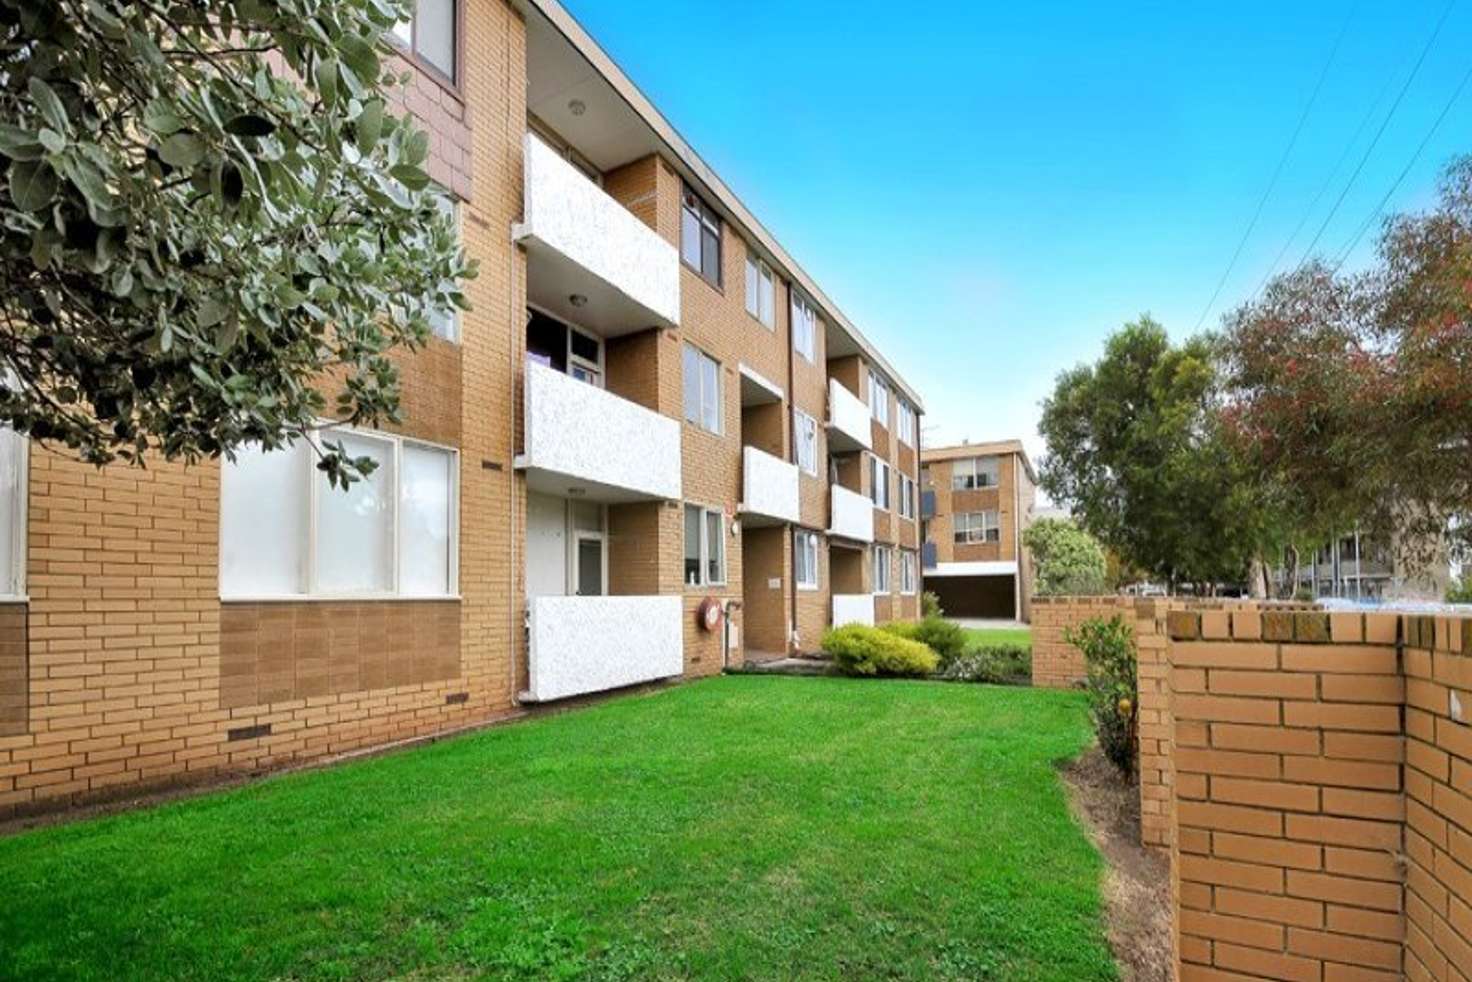 Main view of Homely apartment listing, 5/4 McKay Street, Coburg VIC 3058